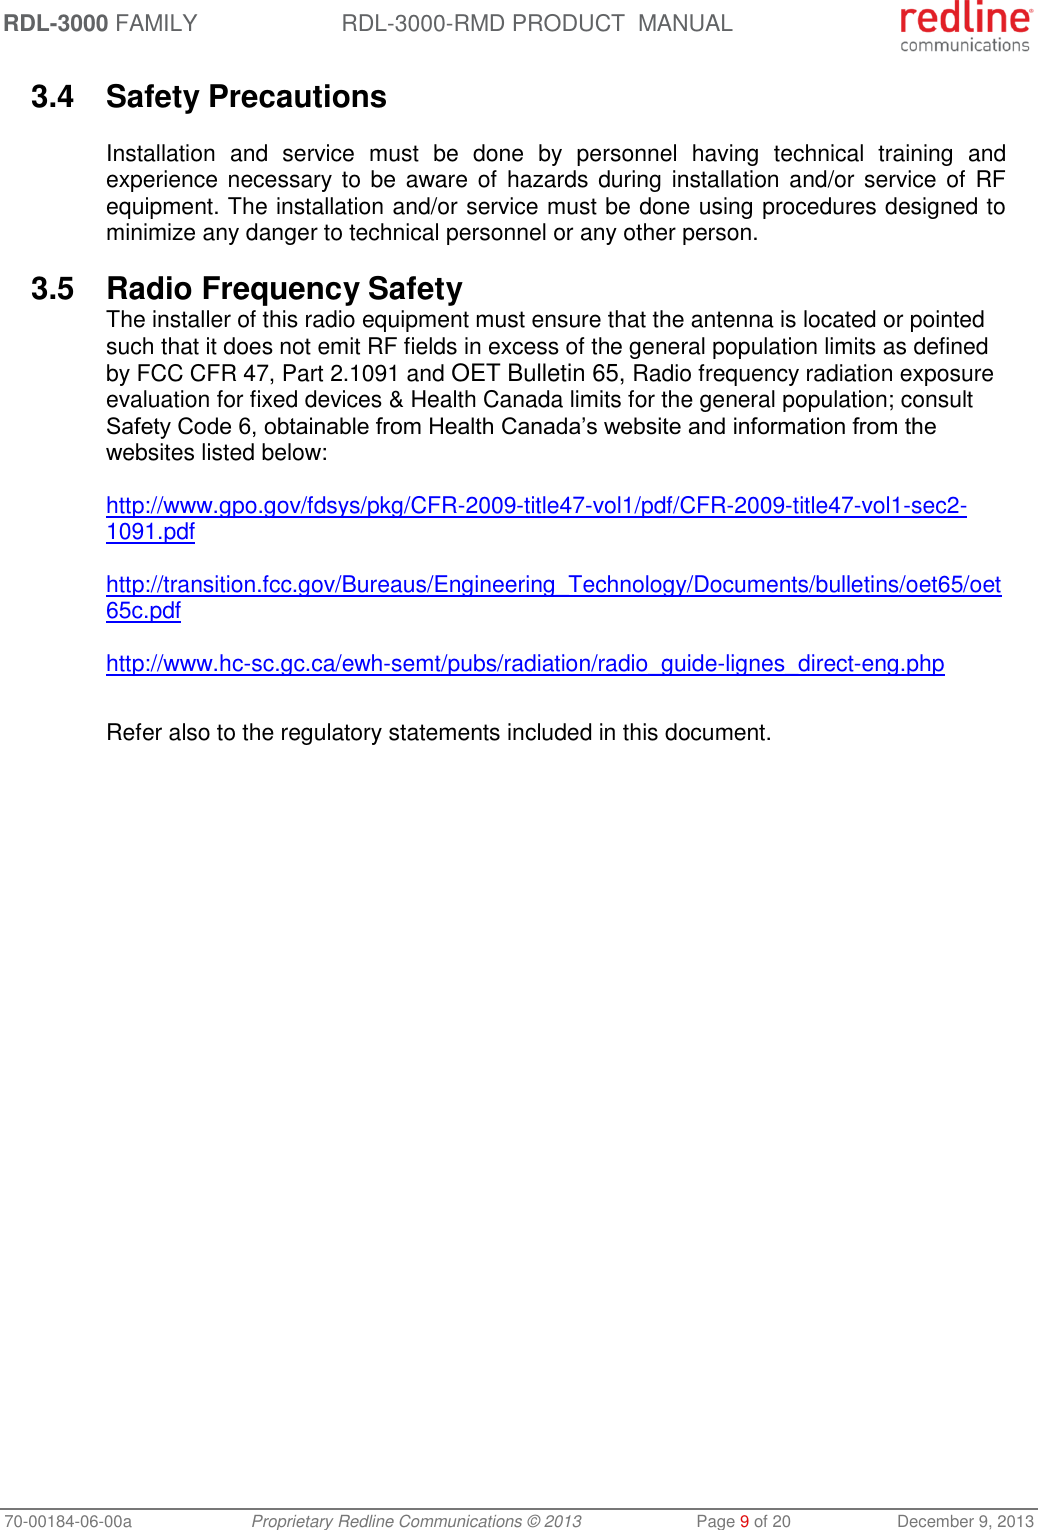 RDL-3000 FAMILY RDL-3000-RMD PRODUCT  MANUAL 70-00184-06-00a  Proprietary Redline Communications © 2013  Page 9 of 20  December 9, 2013 3.4  Safety Precautions  Installation  and  service  must  be  done  by  personnel  having  technical  training  and experience necessary to be aware of  hazards during installation and/or service of  RF equipment. The installation and/or service must be done using procedures designed to minimize any danger to technical personnel or any other person.  3.5  Radio Frequency Safety The installer of this radio equipment must ensure that the antenna is located or pointed such that it does not emit RF fields in excess of the general population limits as defined by FCC CFR 47, Part 2.1091 and OET Bulletin 65, Radio frequency radiation exposure evaluation for fixed devices &amp; Health Canada limits for the general population; consult Safety Code 6, obtainable from Health Canada’s website and information from the websites listed below:  http://www.gpo.gov/fdsys/pkg/CFR-2009-title47-vol1/pdf/CFR-2009-title47-vol1-sec2-1091.pdf   http://transition.fcc.gov/Bureaus/Engineering_Technology/Documents/bulletins/oet65/oet65c.pdf   http://www.hc-sc.gc.ca/ewh-semt/pubs/radiation/radio_guide-lignes_direct-eng.php  Refer also to the regulatory statements included in this document. 